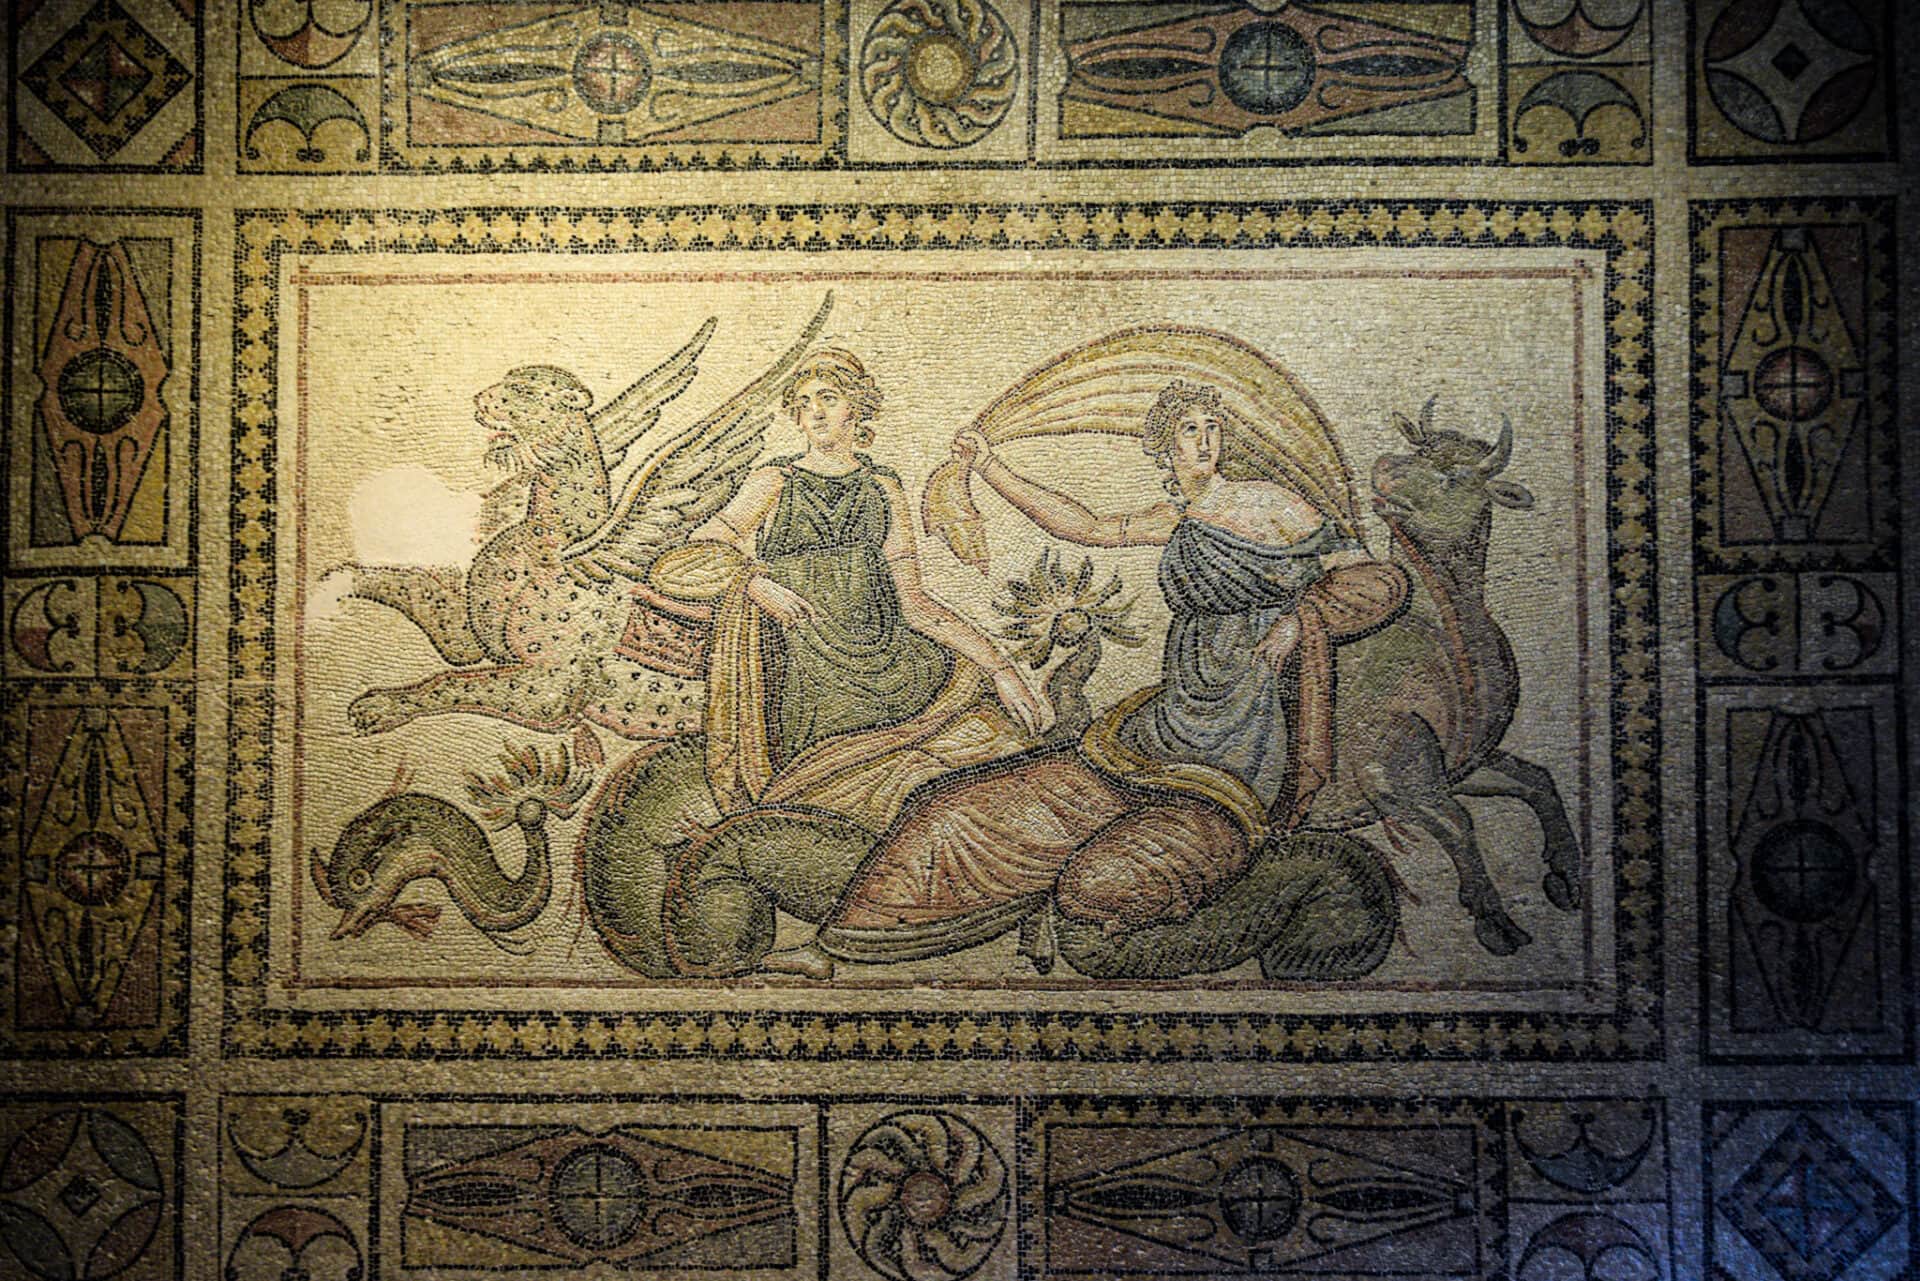 a magnificent ROman mosaic depicting two women, a bull, and a winged jaguar